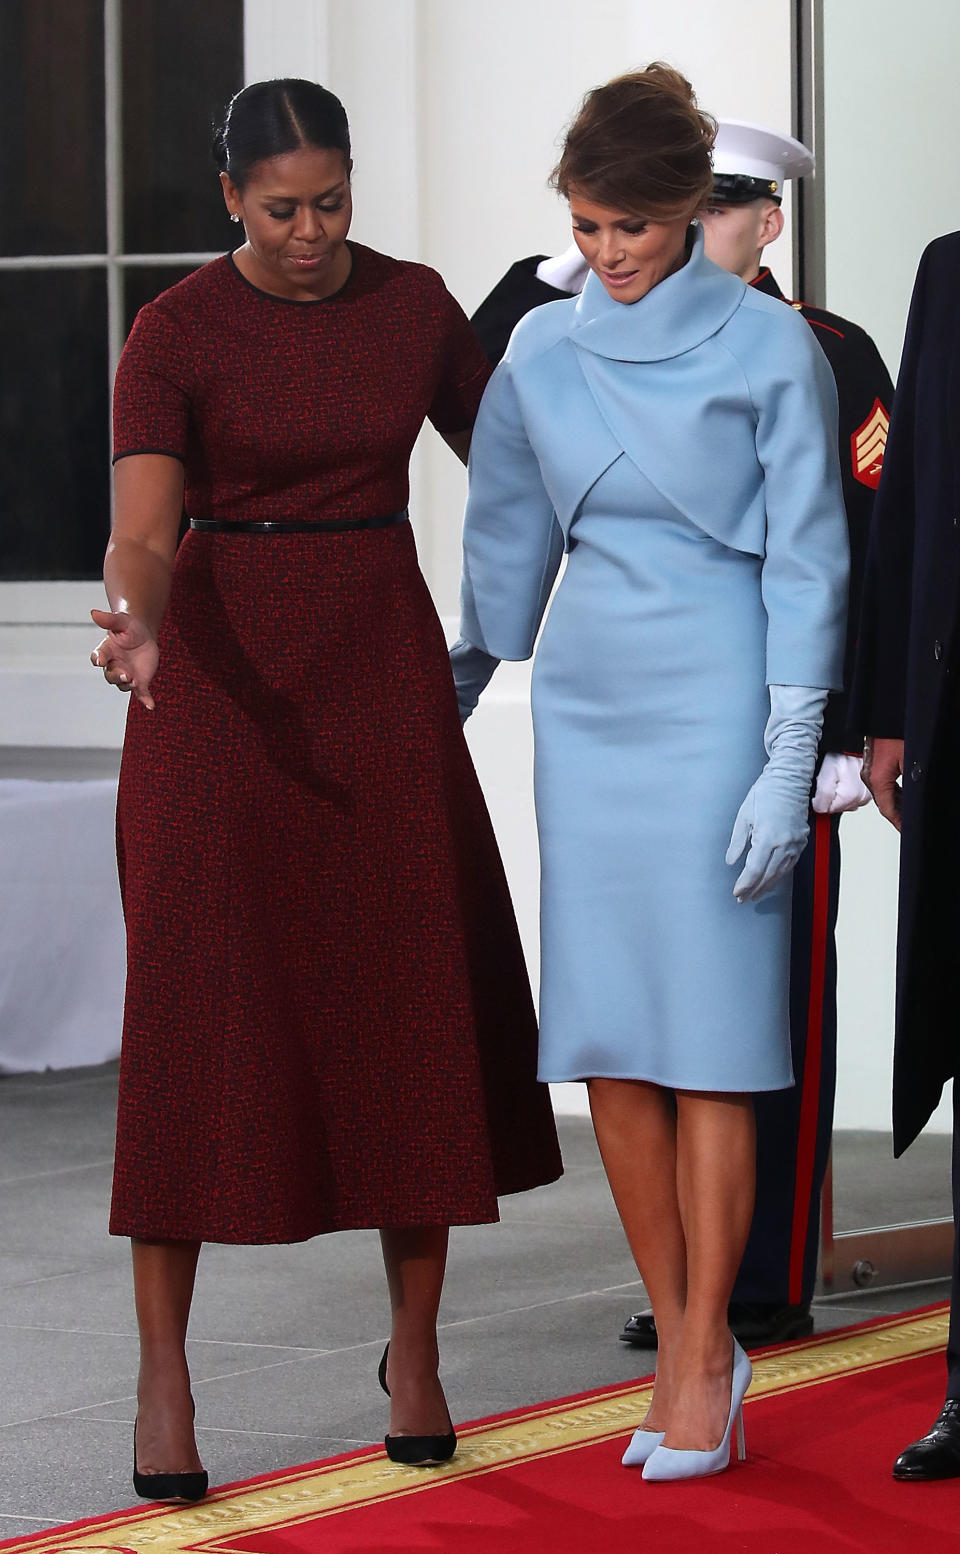 A new story says Michelle Obama and Melania Trump share similar traits. (Photo: Getty Images)